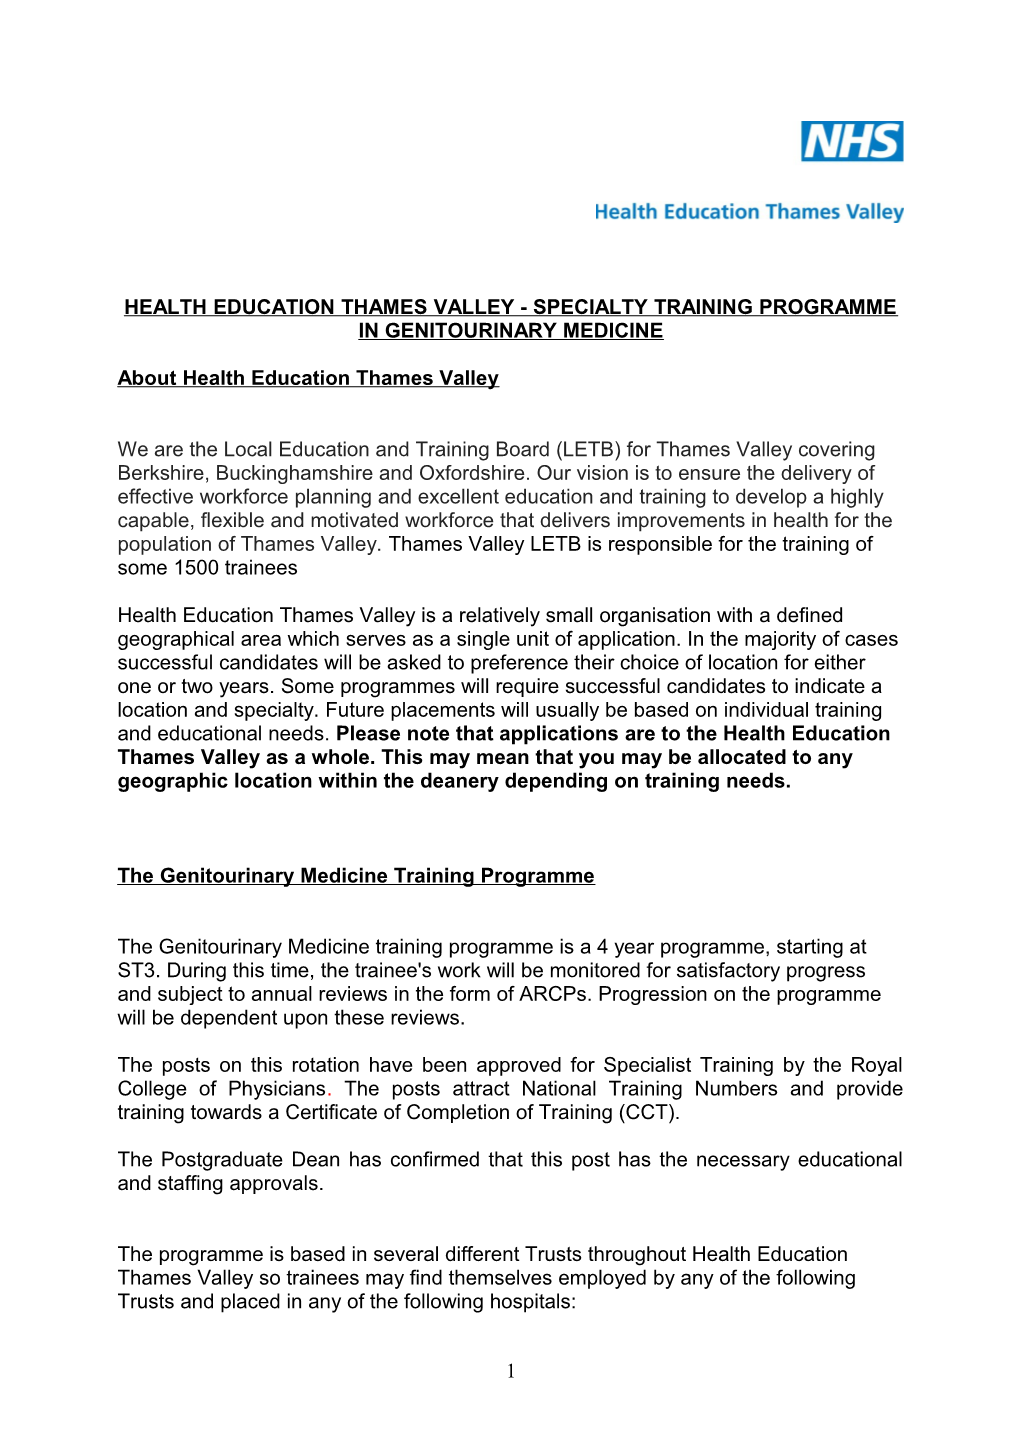 Health Education Thames Valley - Specialty Training Programme in Genitourinary Medicine